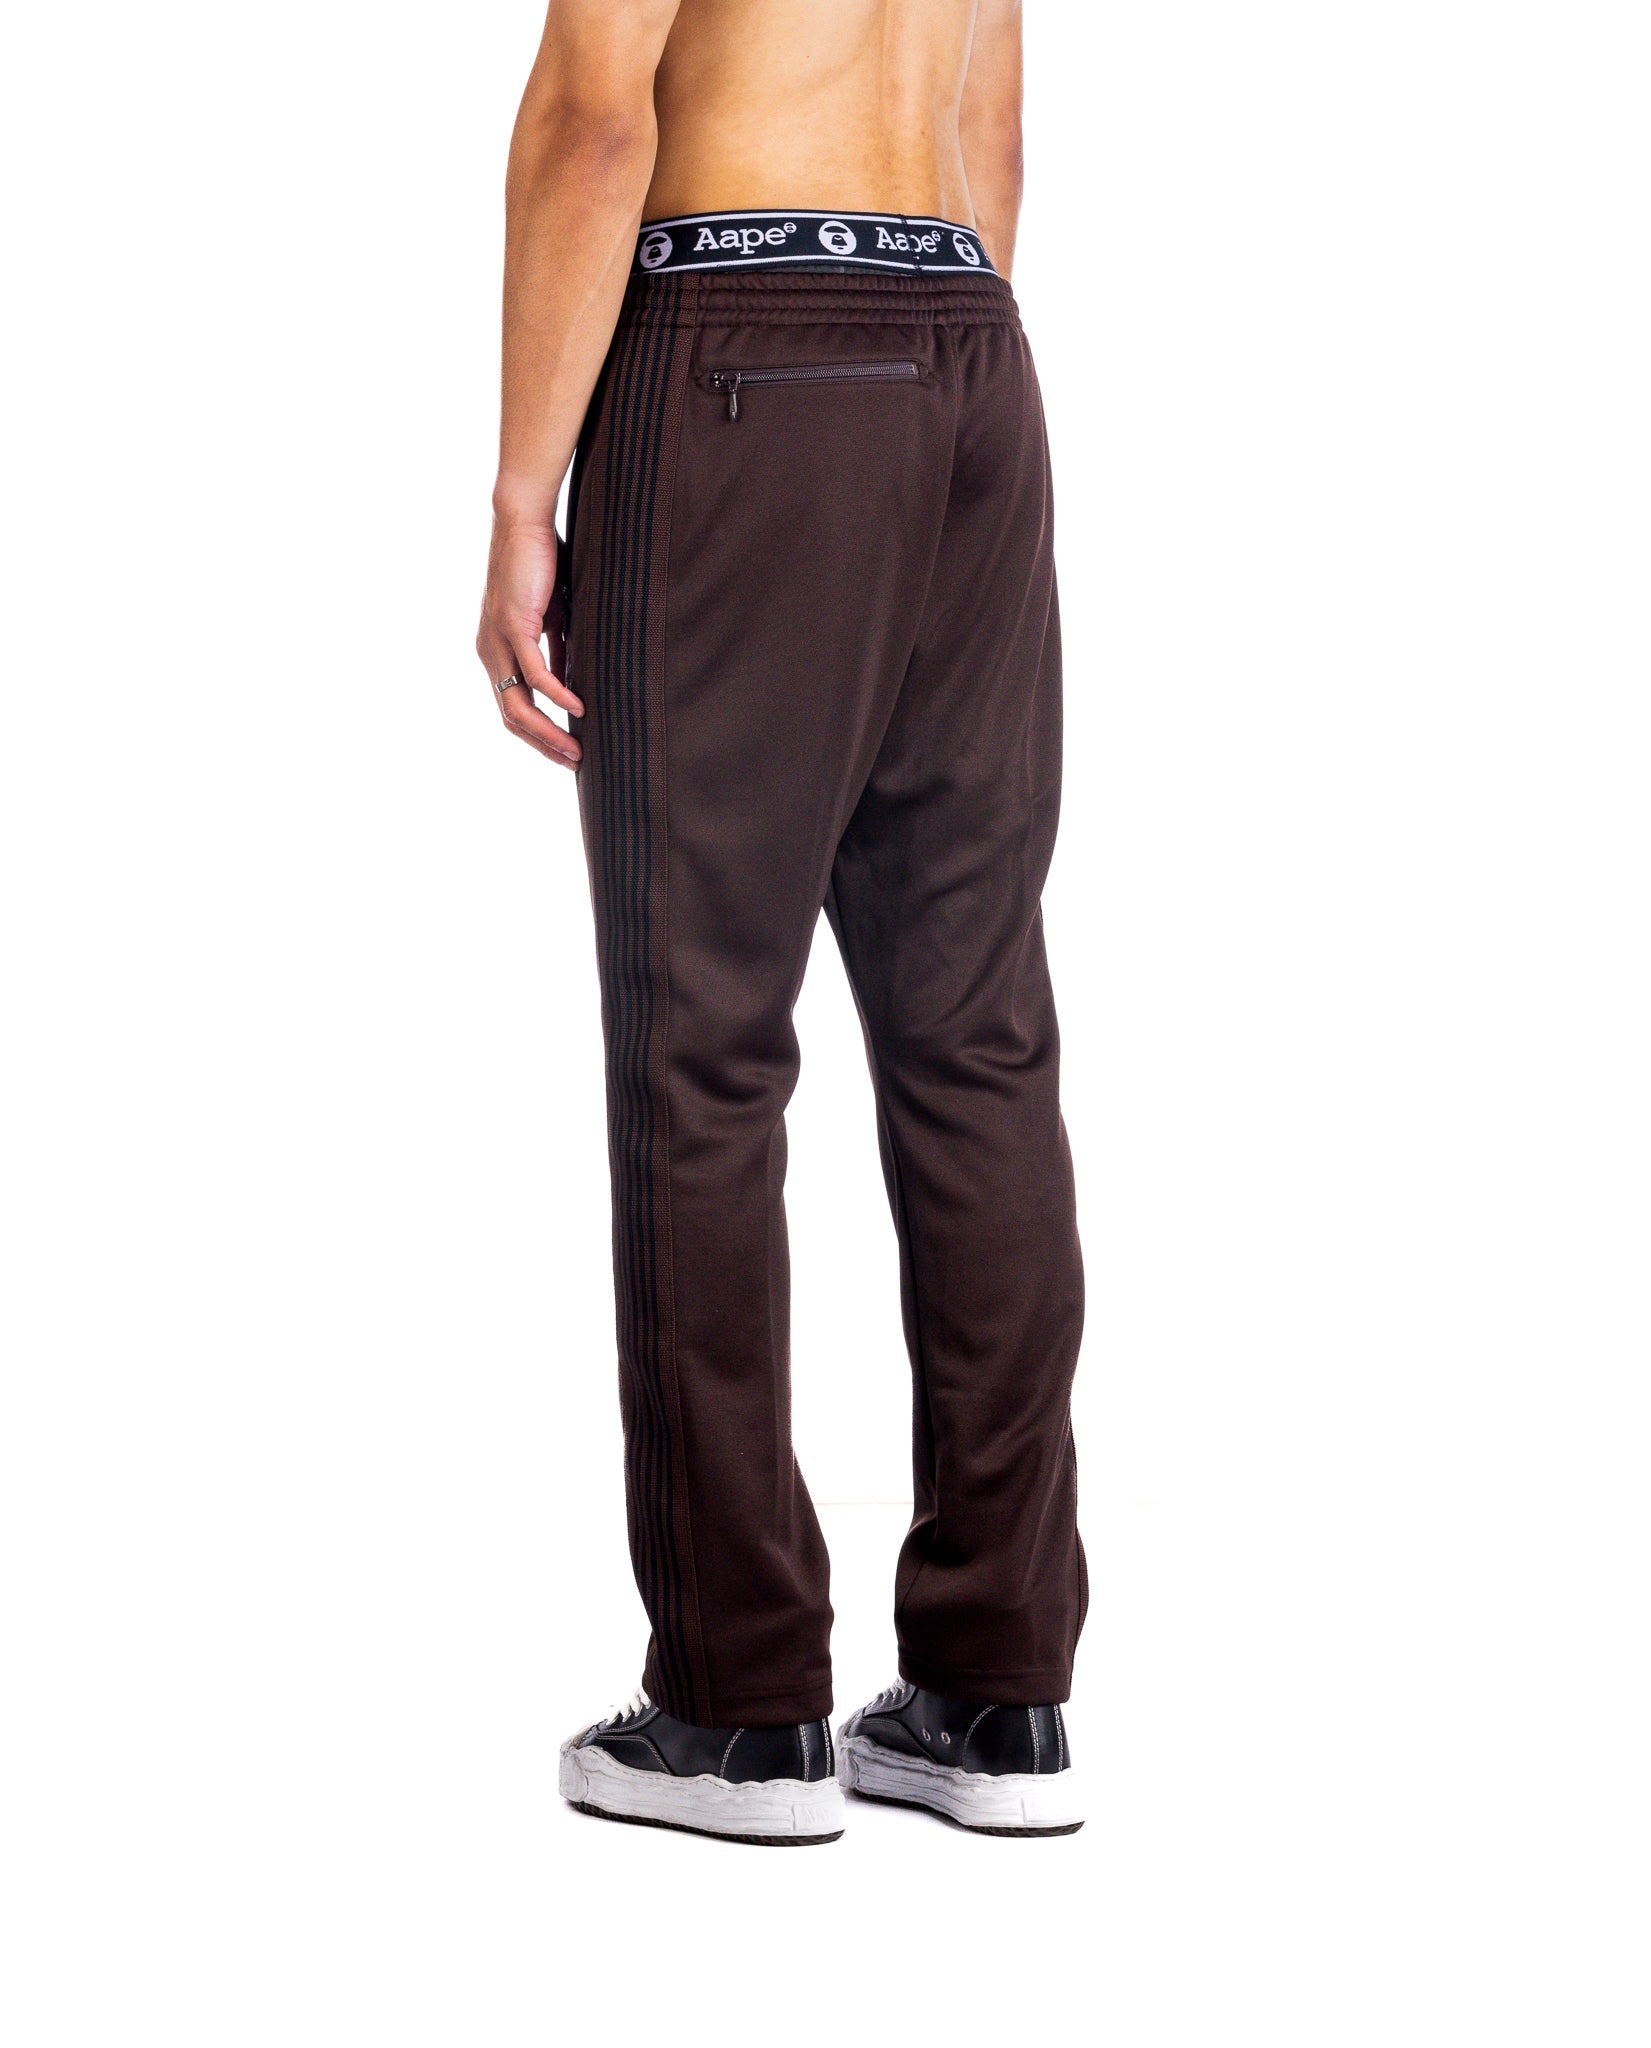 Needles Track Pants Narrow 'Brown/Black' Exclusive - Experience